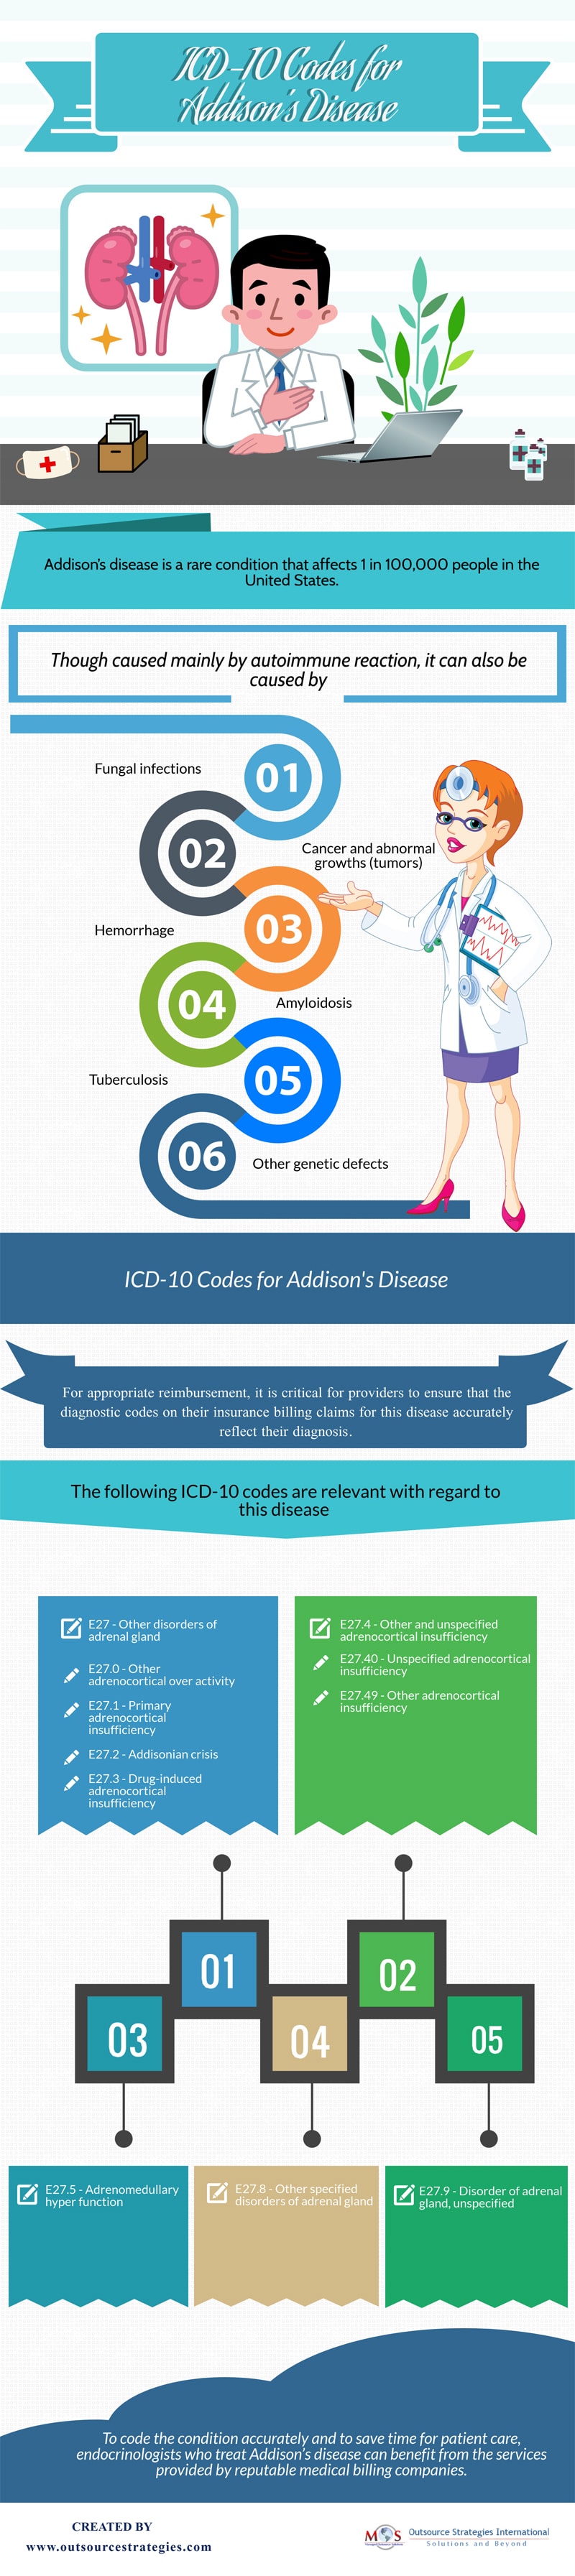 ICD-10 Coding for Addison's Disease [Infographics]